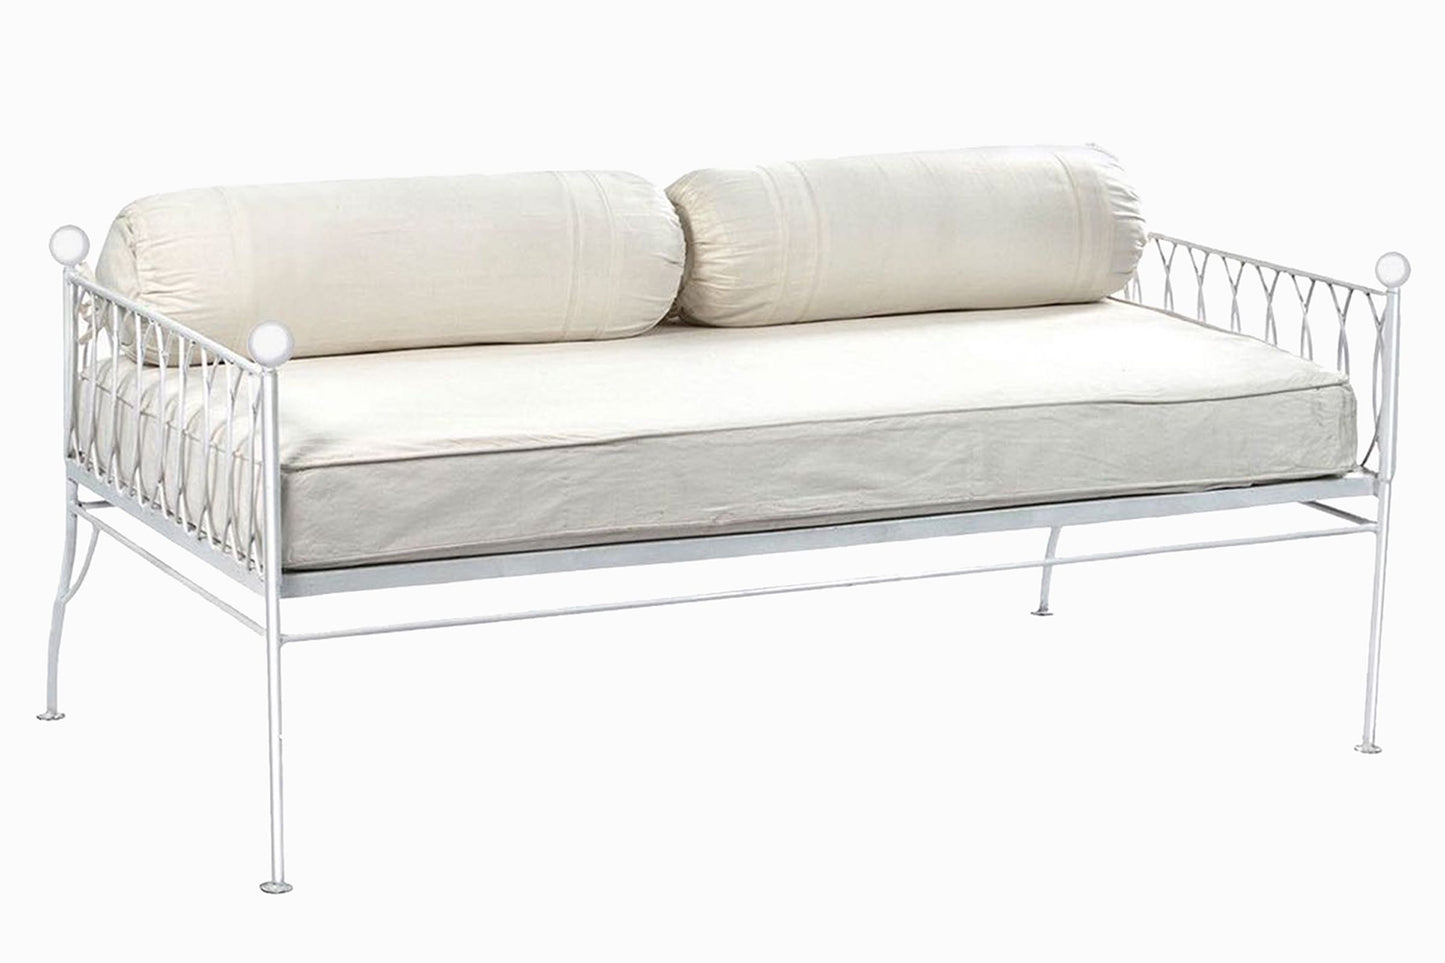 PALM SPRINGS WHITE METAL DAY BED, CREAM CUSHIONS